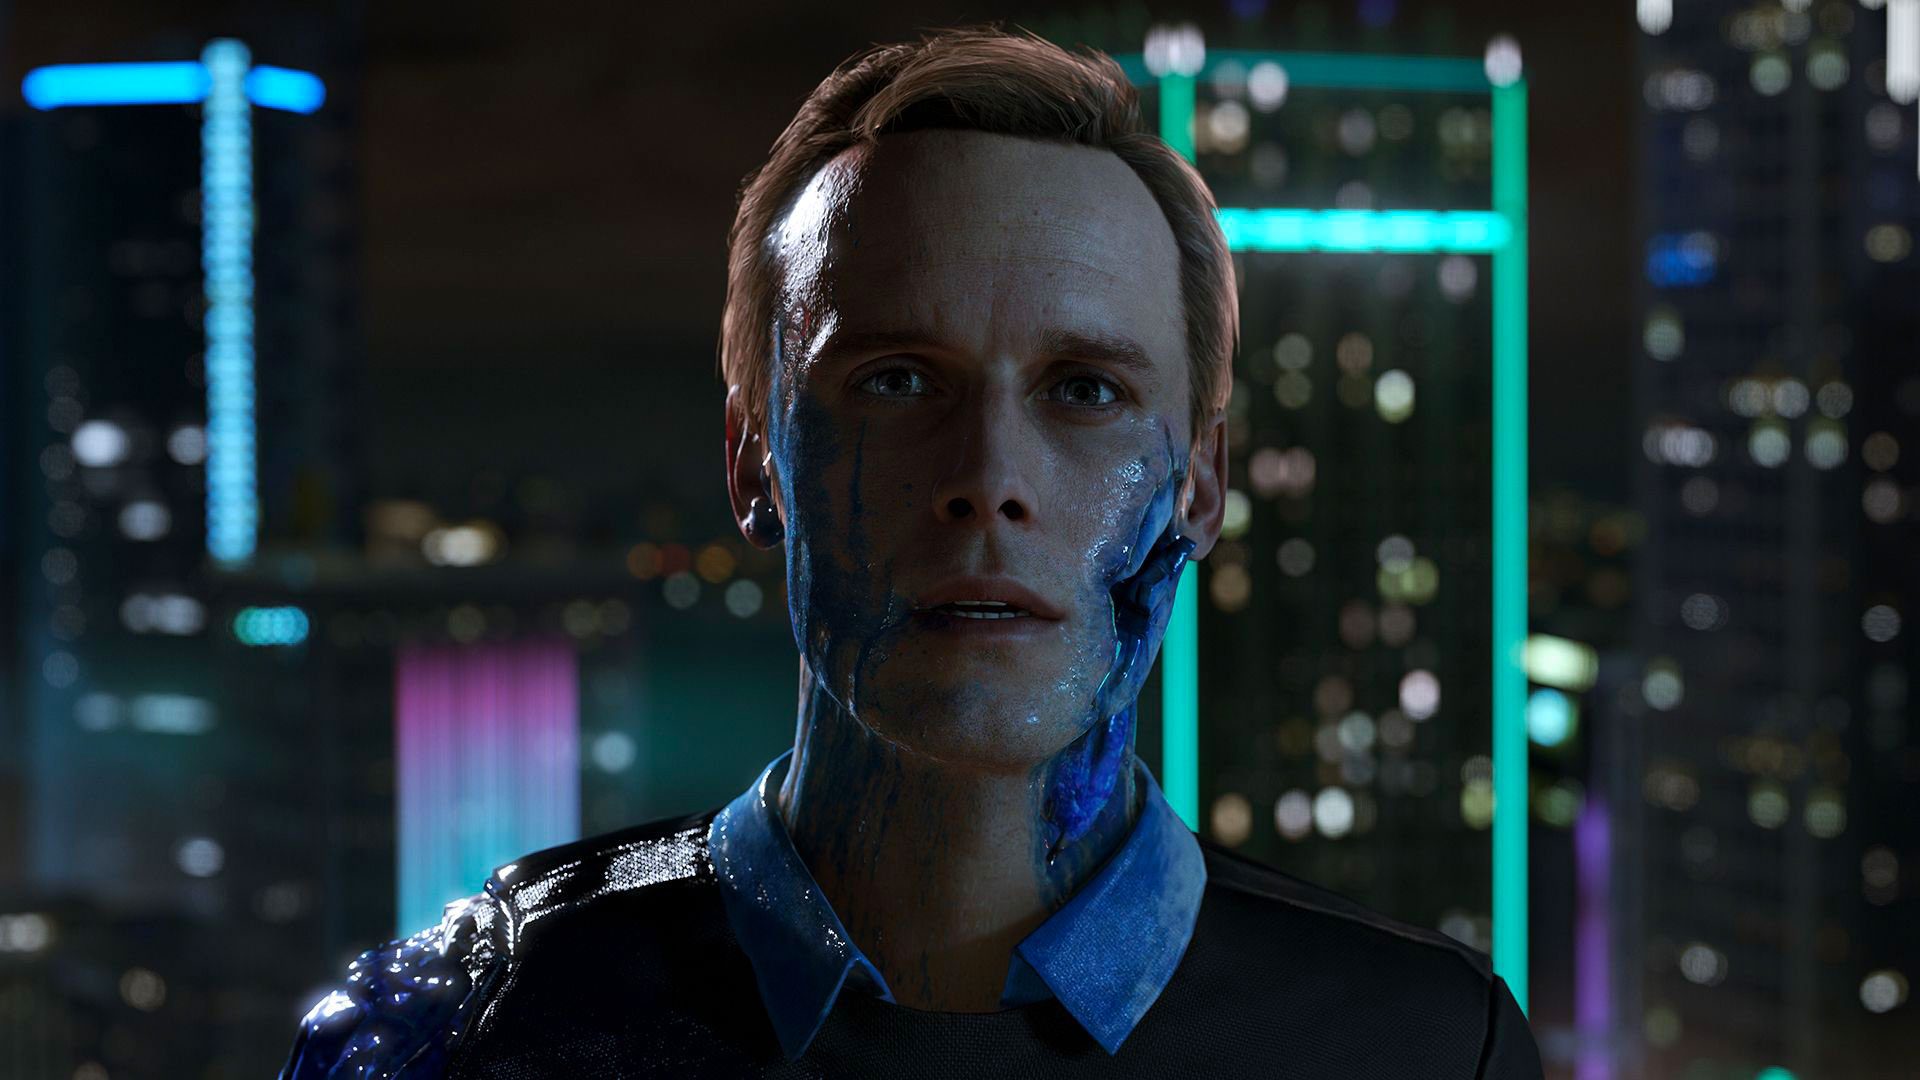 Detroit Become Human  Realistic Ultra Graphics Gameplay [4K UHD 60FPS]  Full Game 